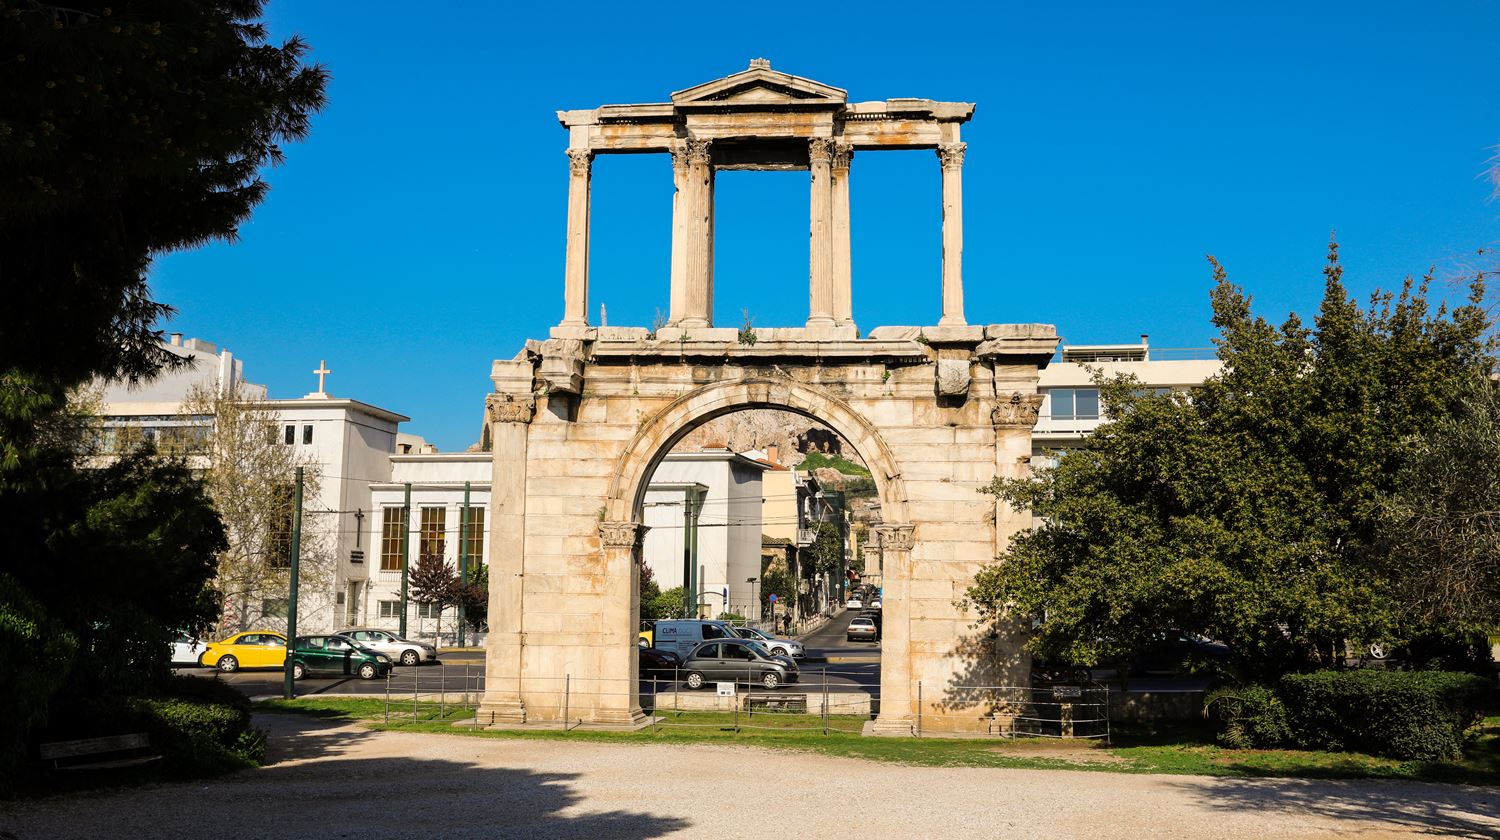 Hadrian's gate on a sunny day, Athens historical center, Greece. Horizontal.